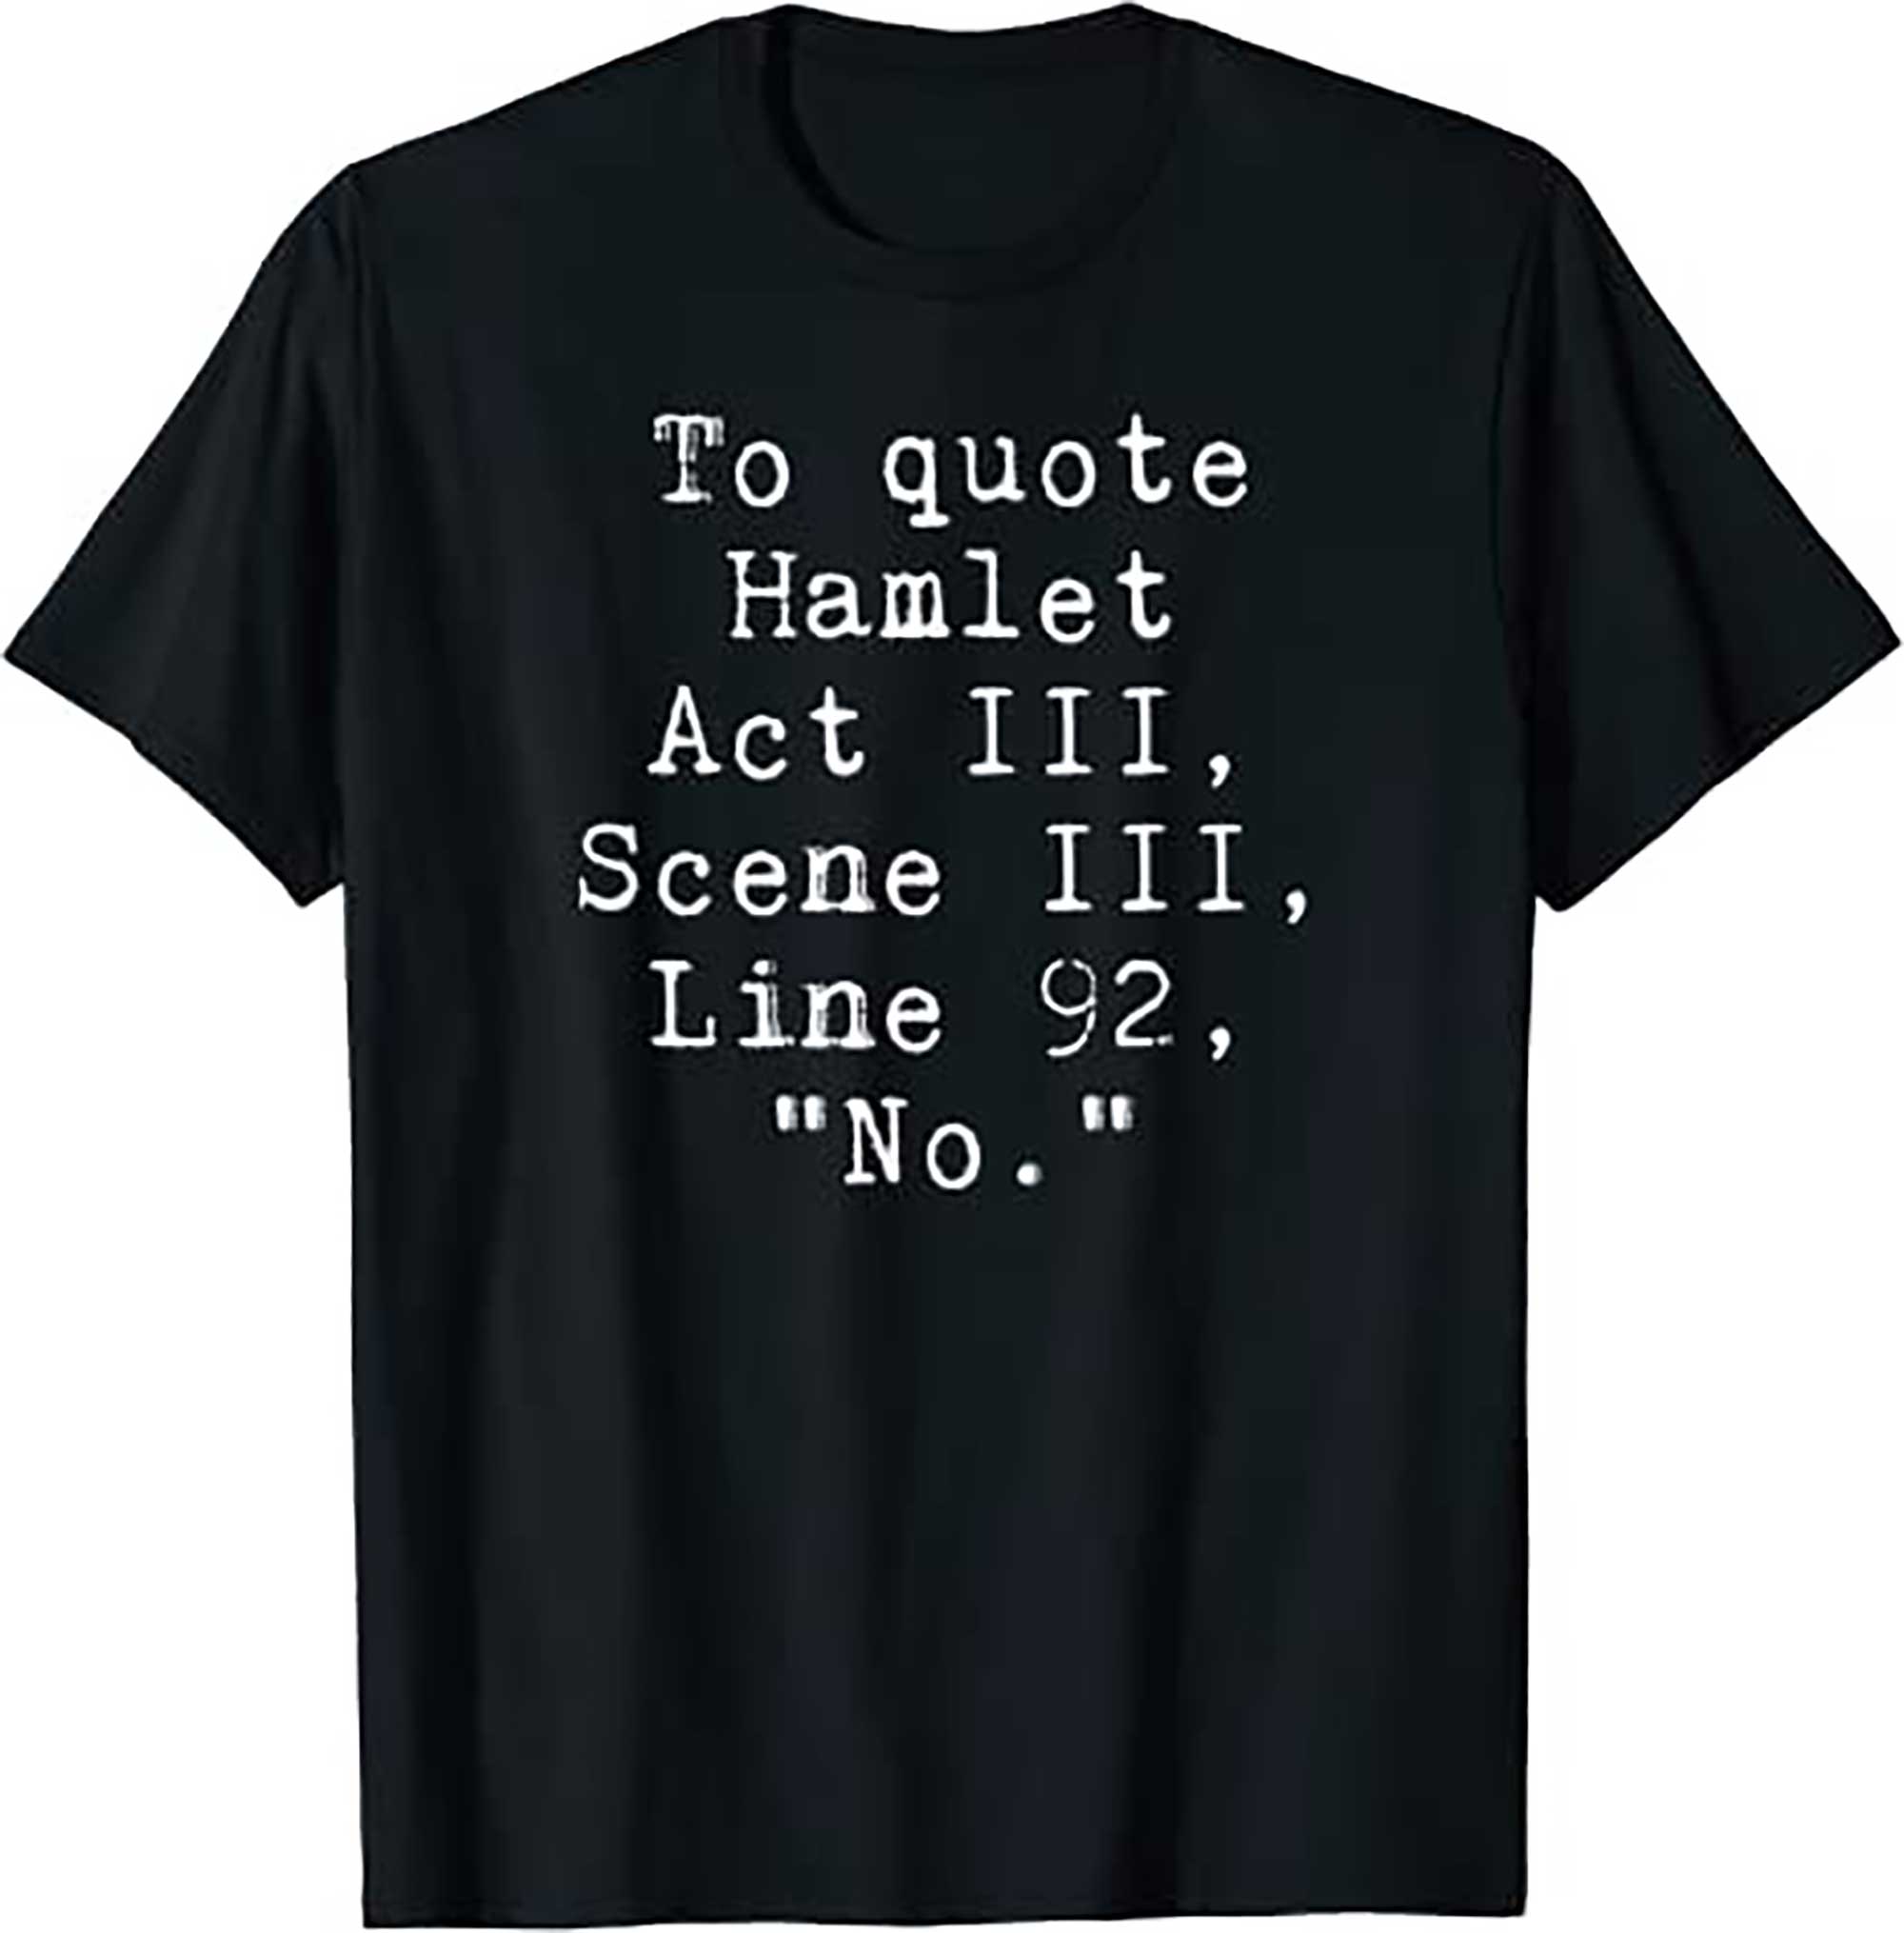 To Quote Hamlet Funny Literary T Shirt for Women Men Kids